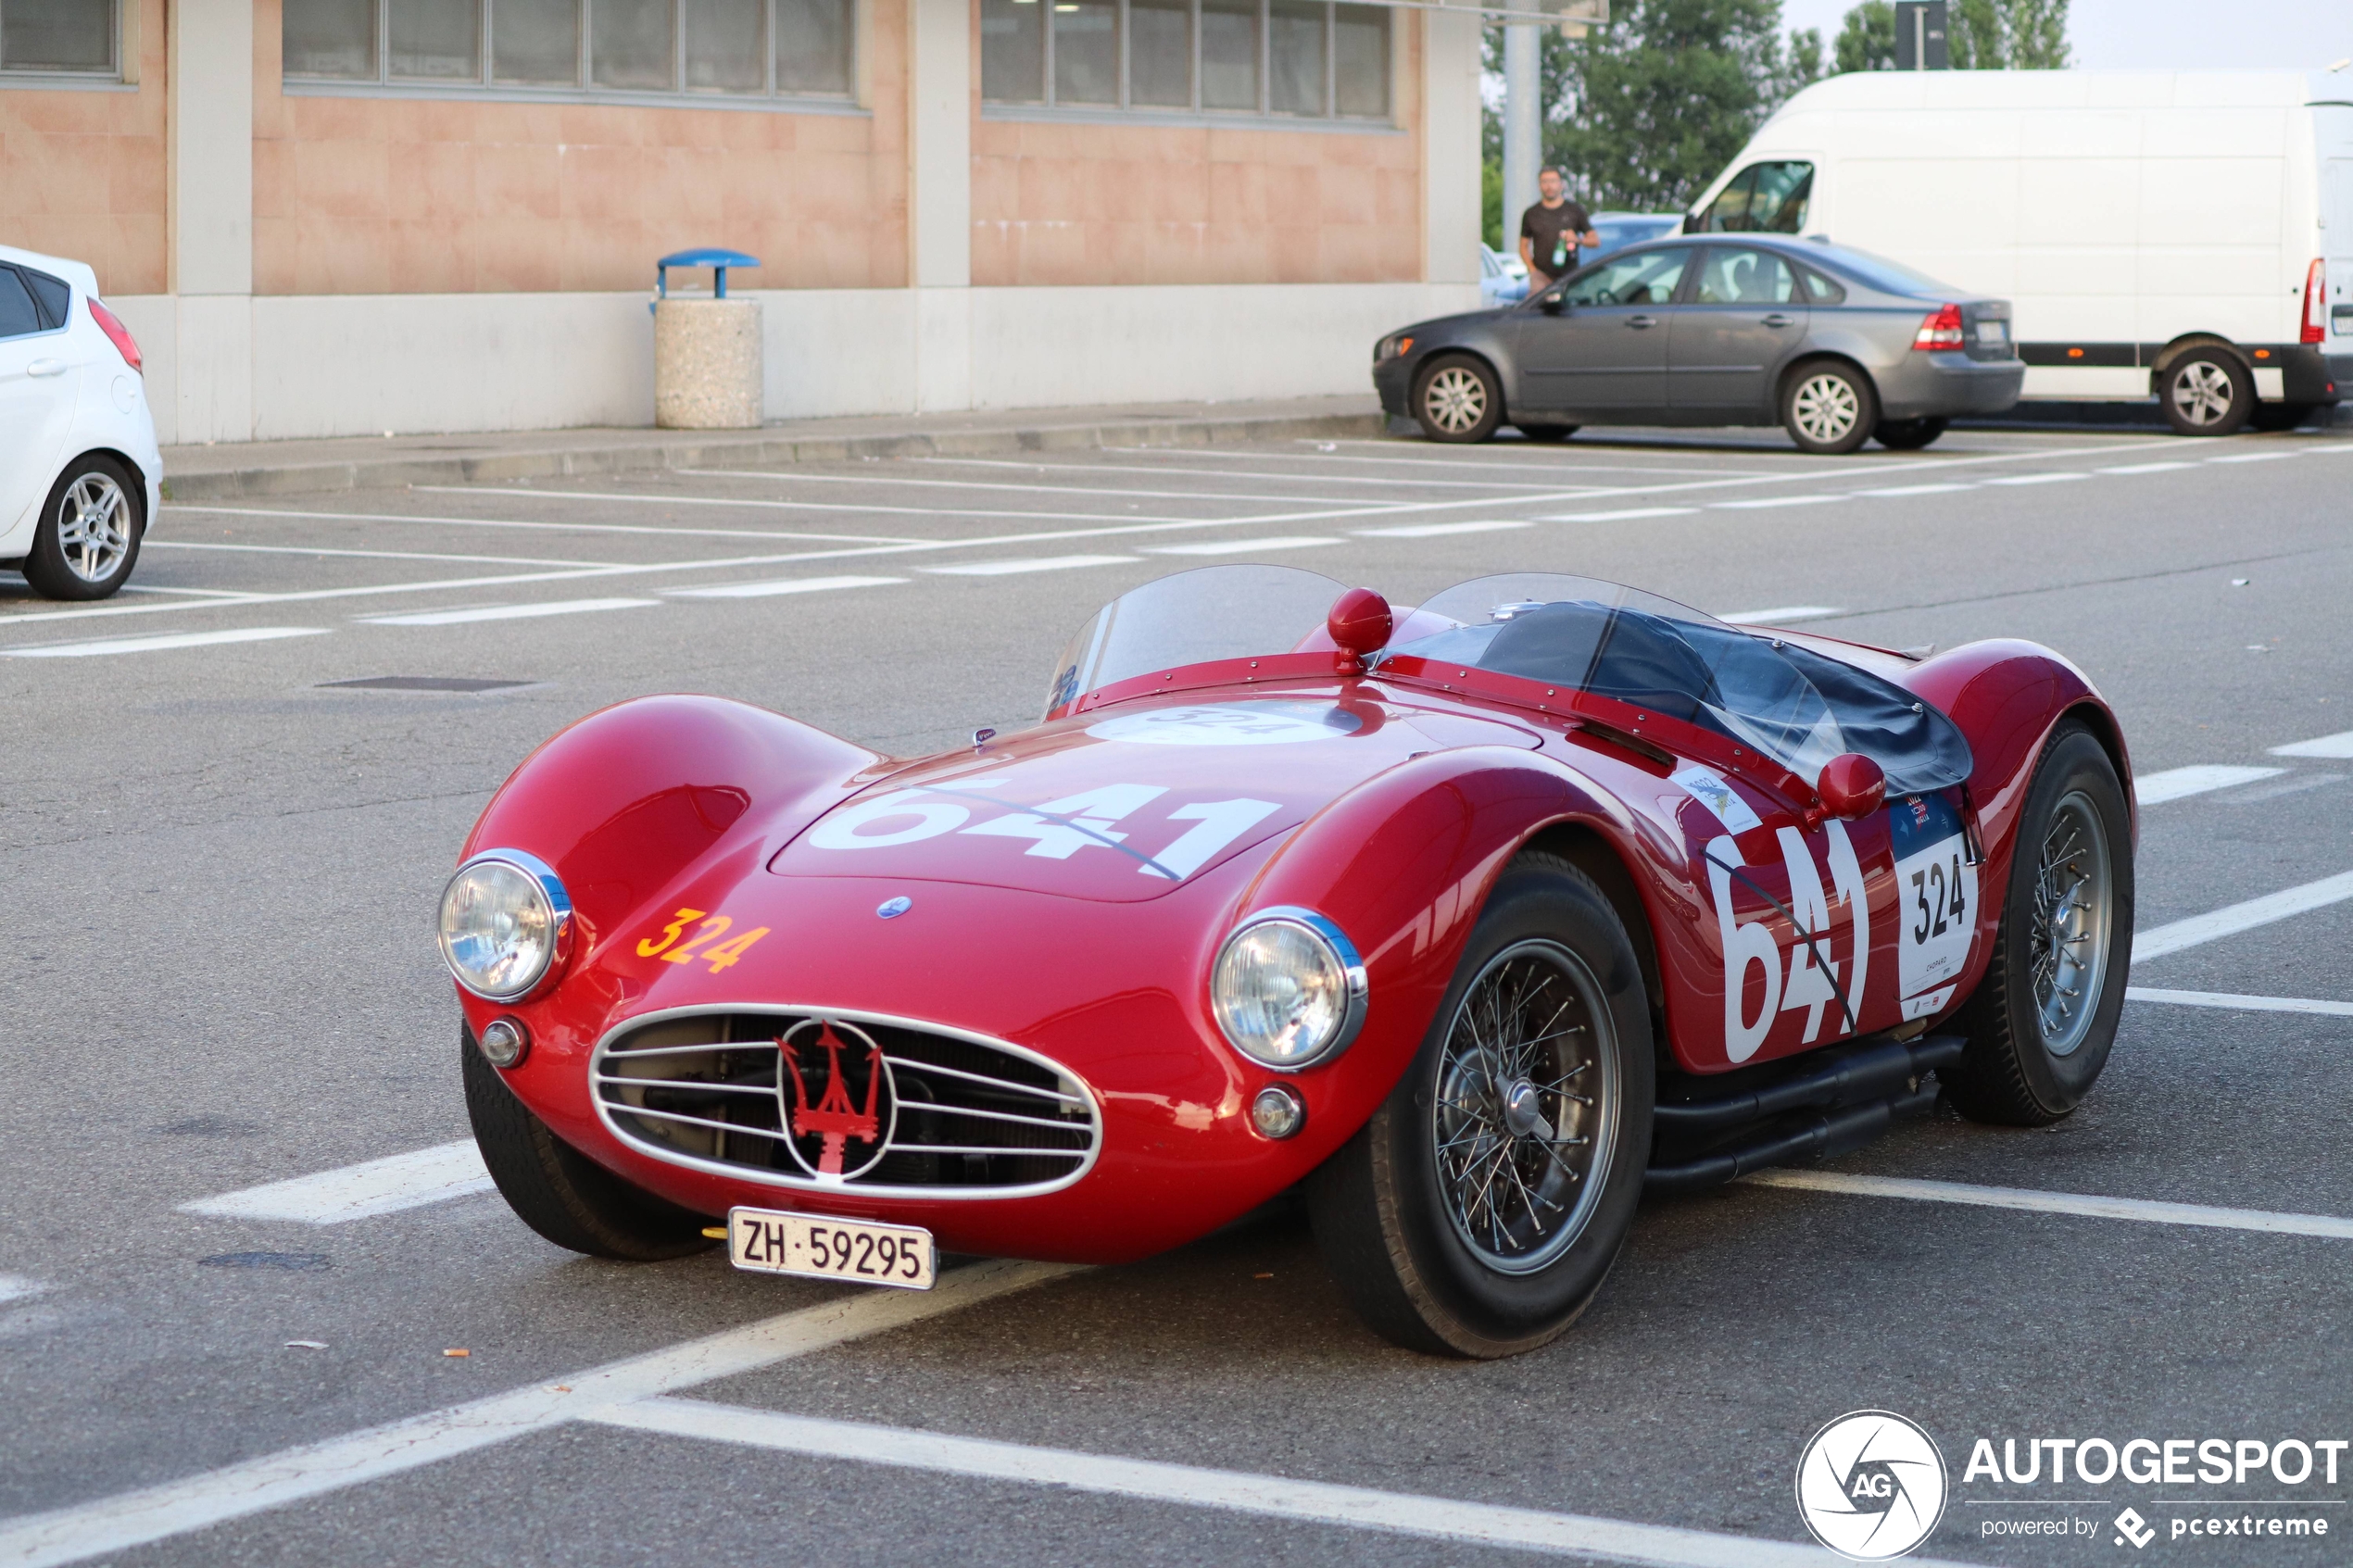 For the first time a Maserati A6 GCS by Fiandri & Malagoli has been uploaded to the site...